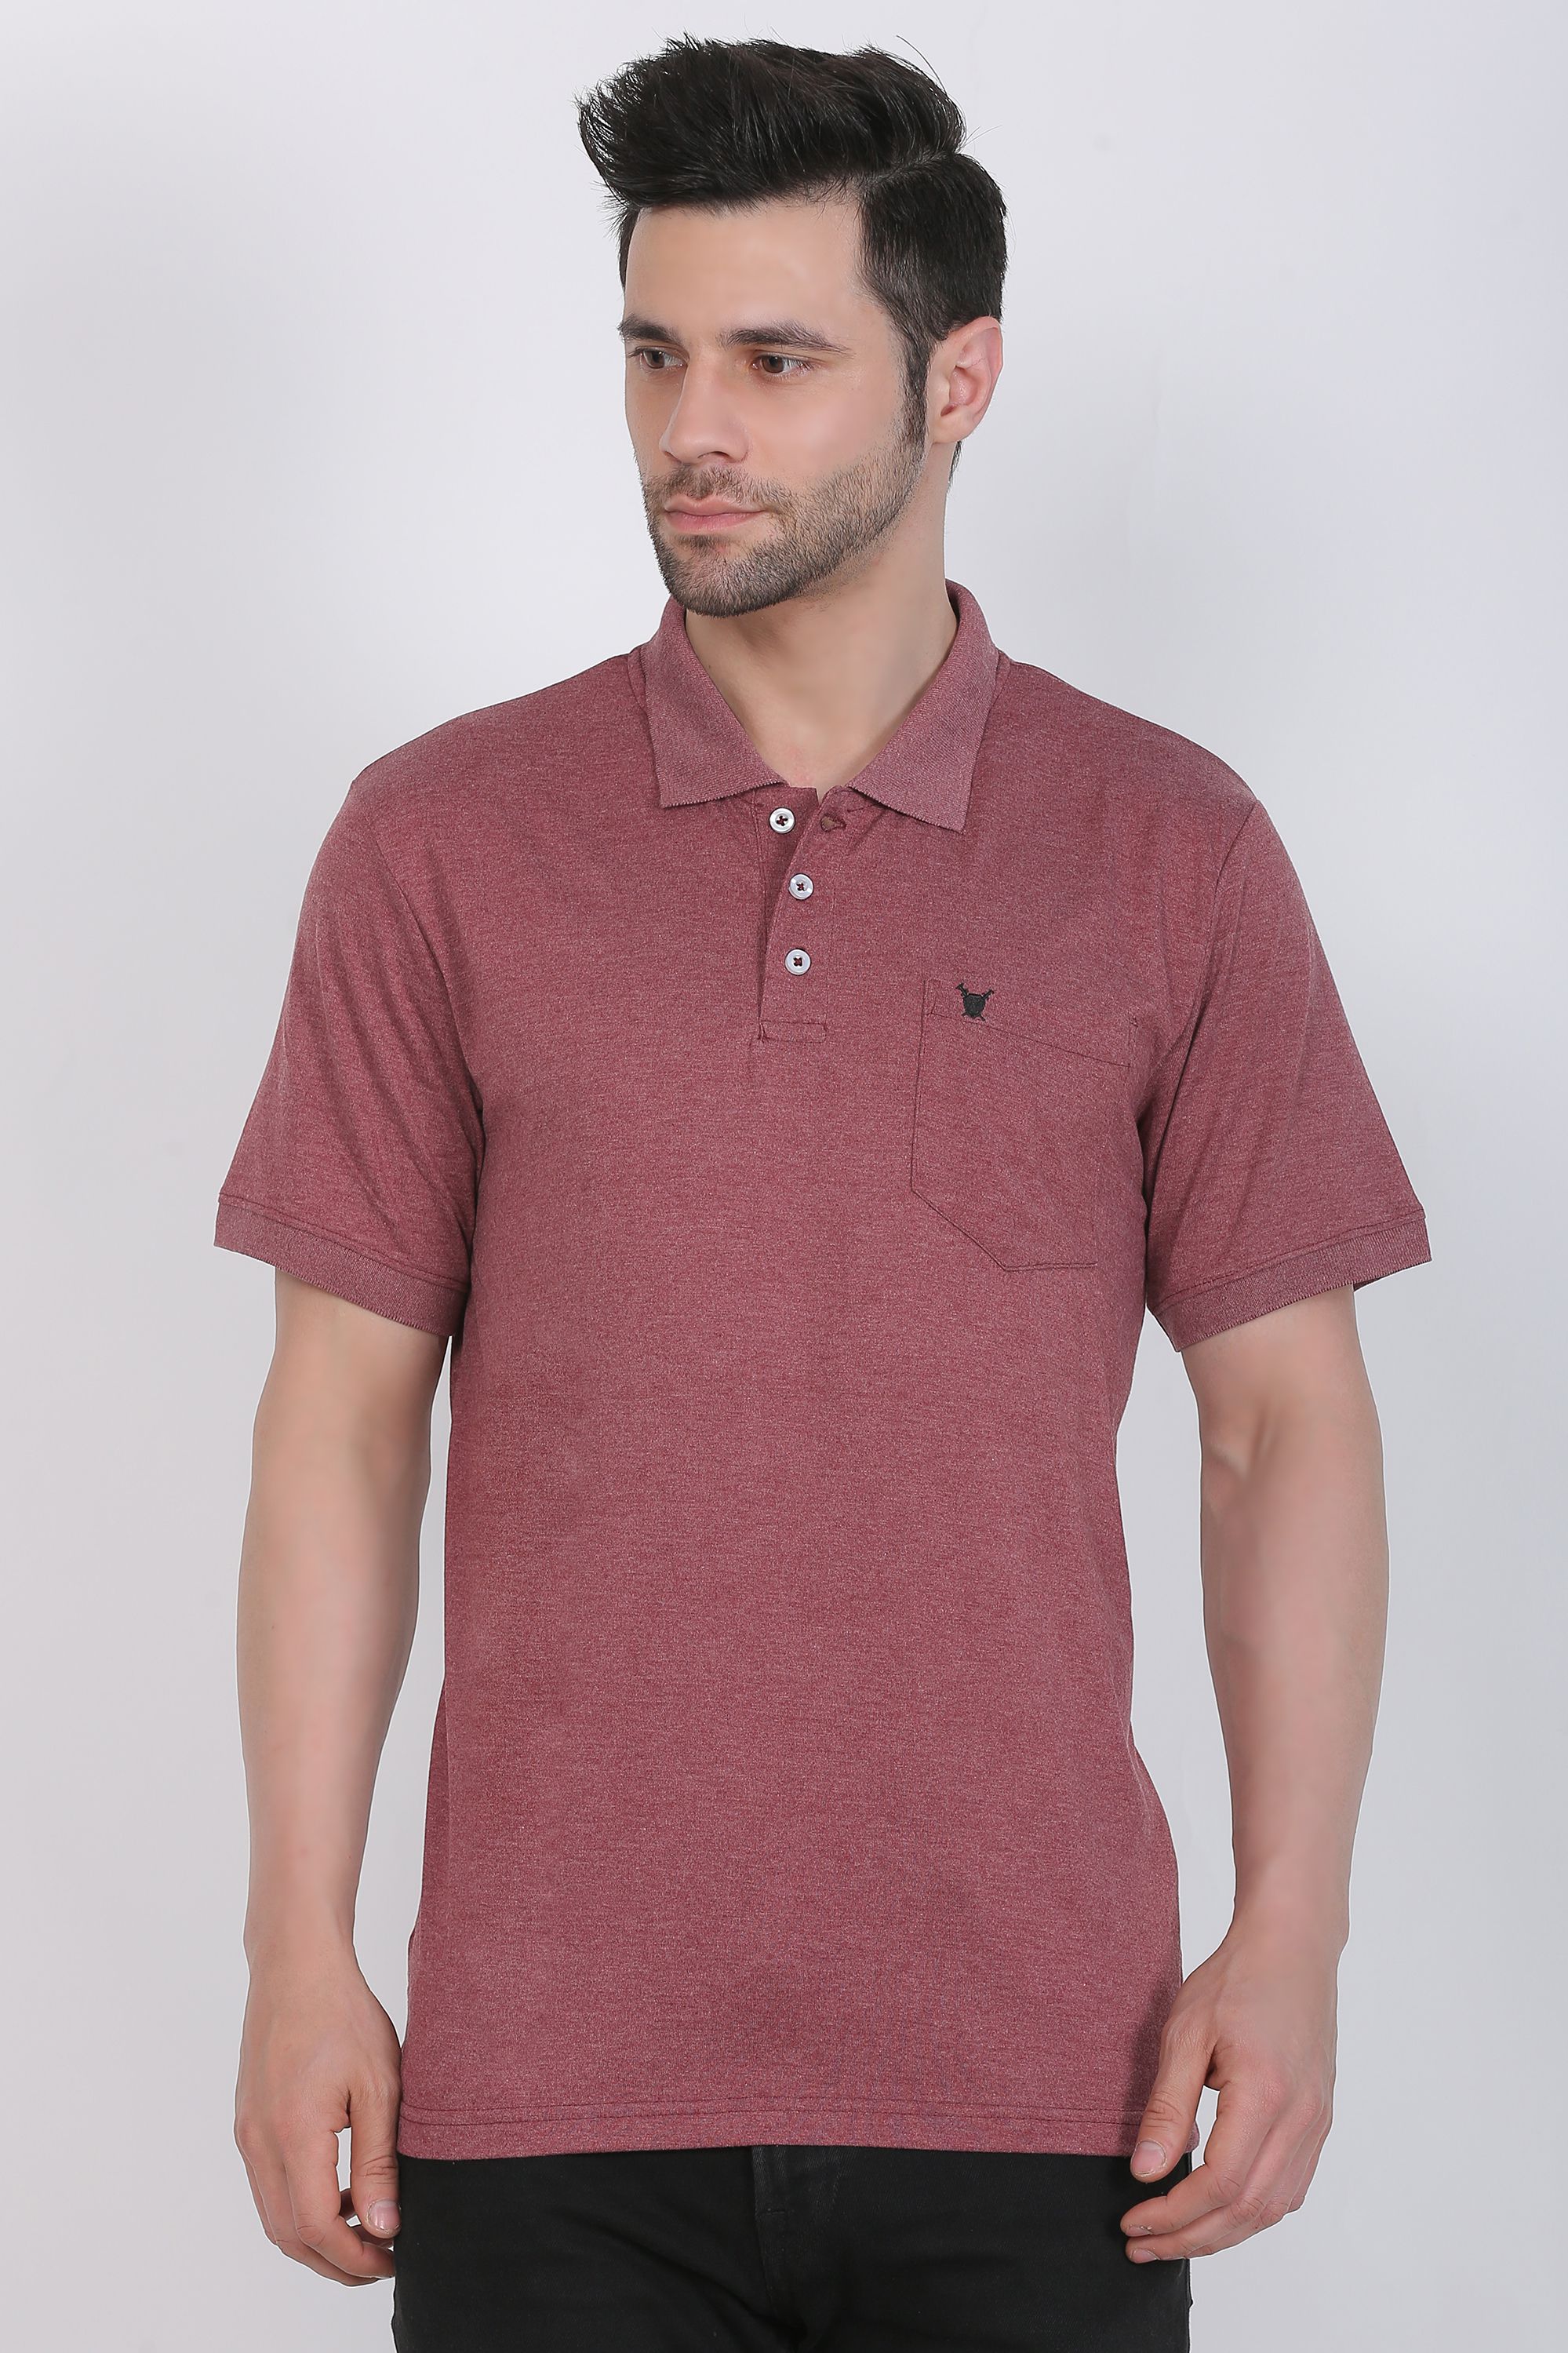     			Indian Pridee Cotton Regular Fit Solid Half Sleeves Men's Polo T Shirt - Maroon ( Pack of 1 )